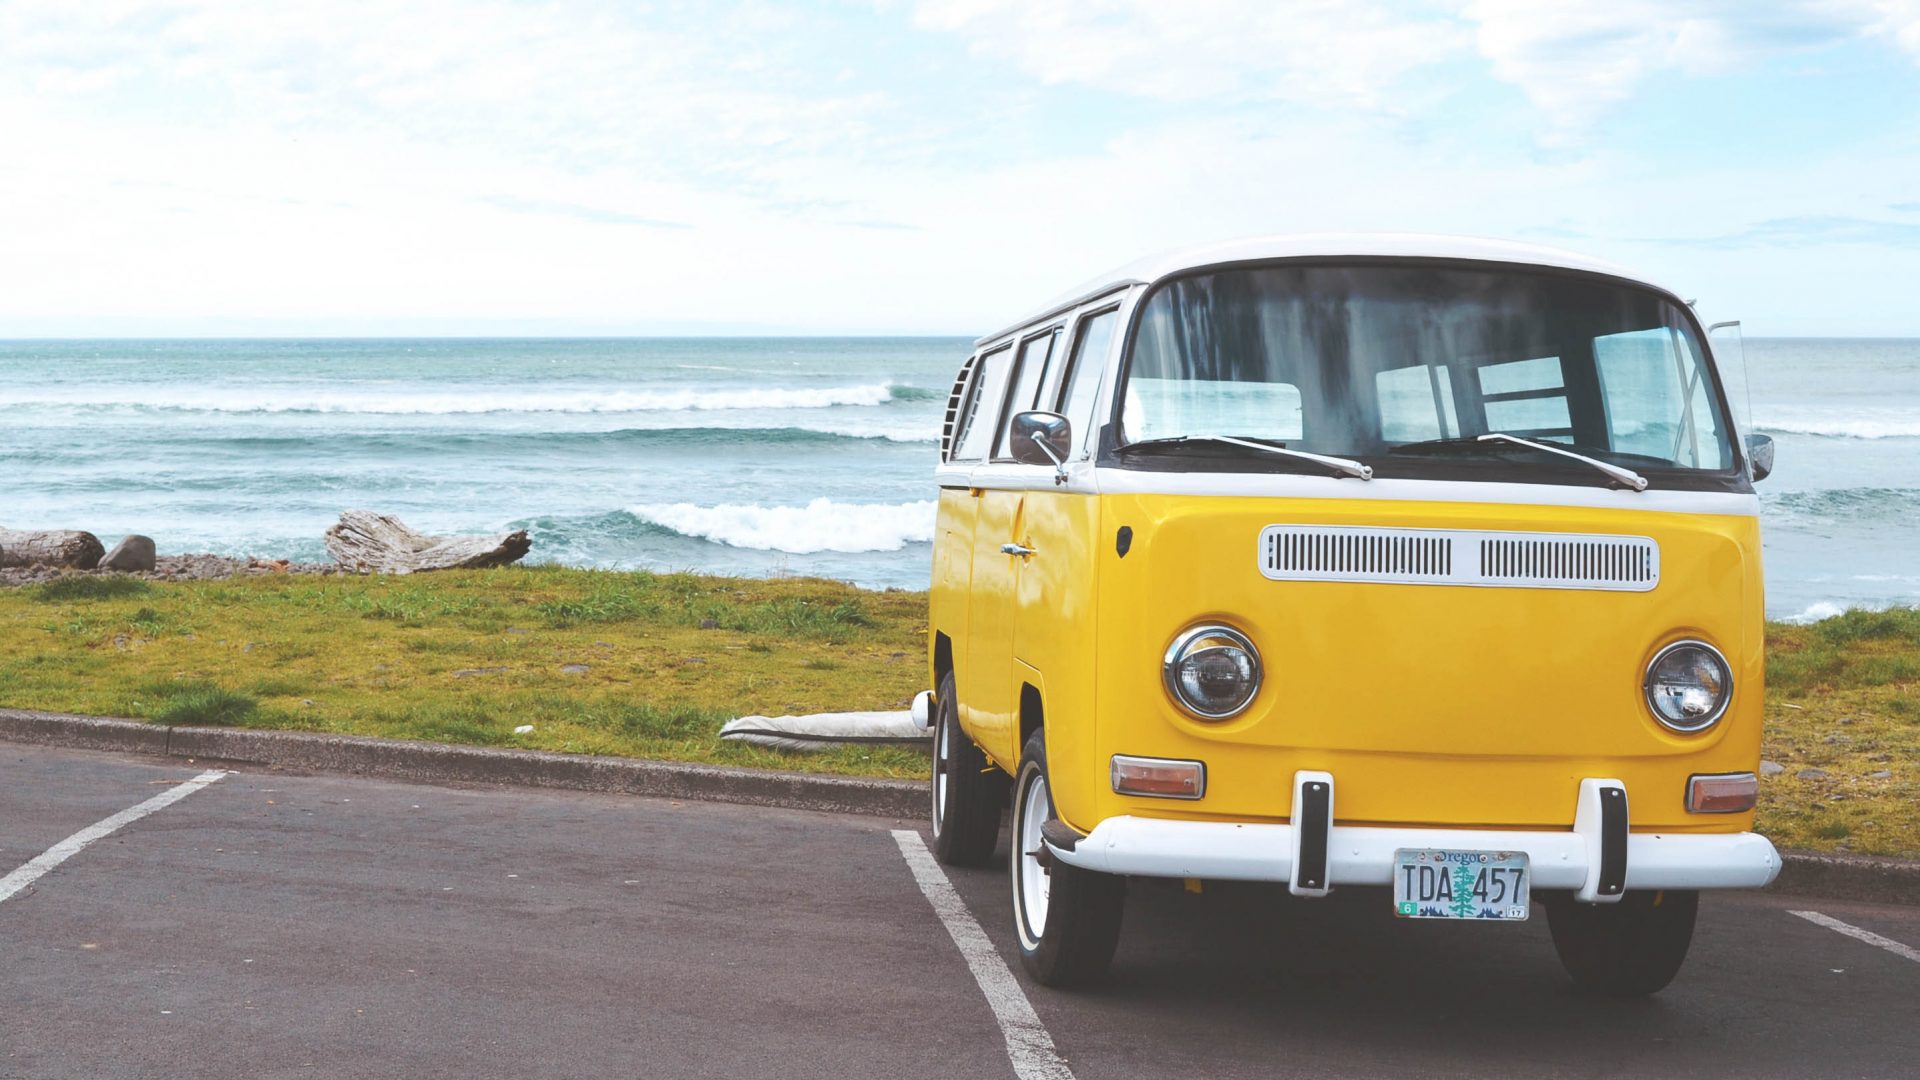 A van is parked at the seaside in the USA.